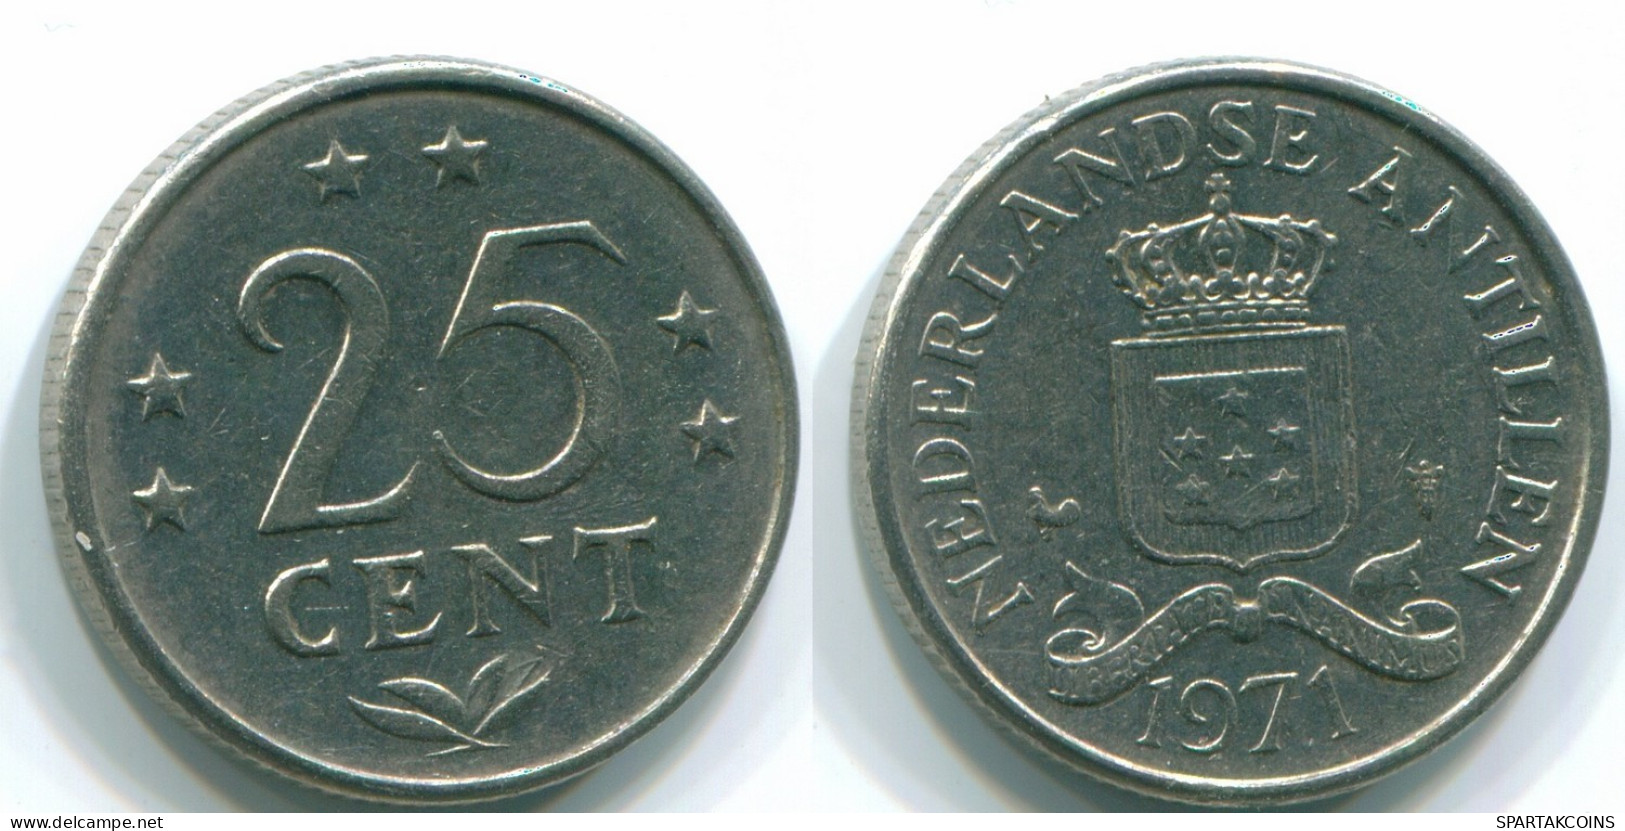 25 CENTS 1971 NETHERLANDS ANTILLES Nickel Colonial Coin #S11564.U.A - Antille Olandesi